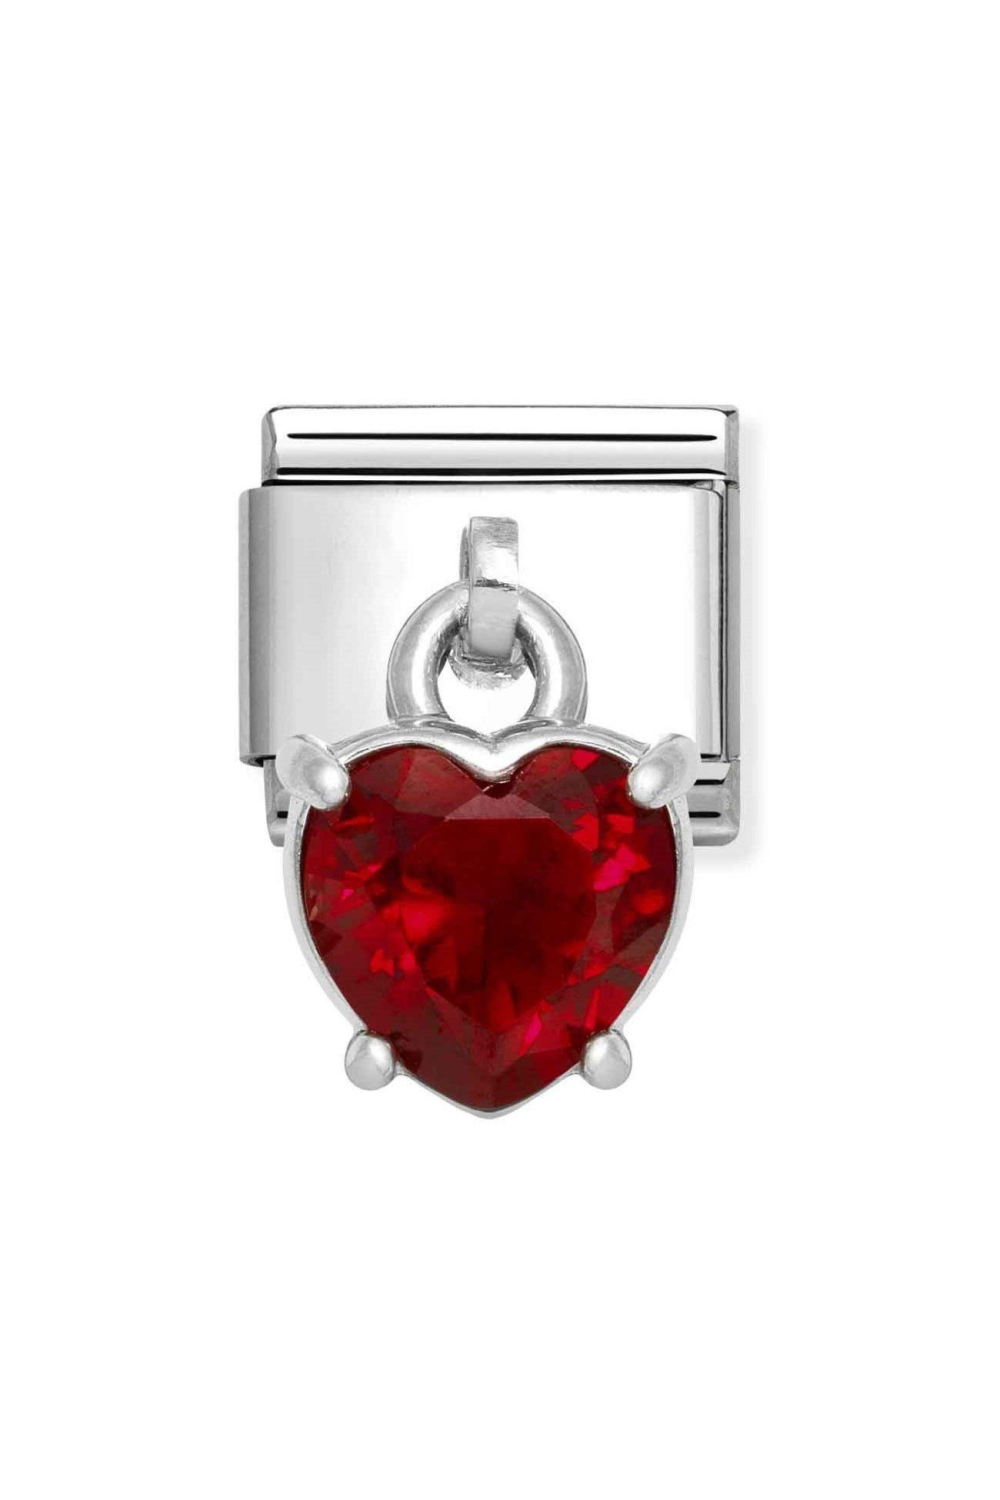 CHARMS 925 Sterling Silver and CZ Heart Cut Red CZ